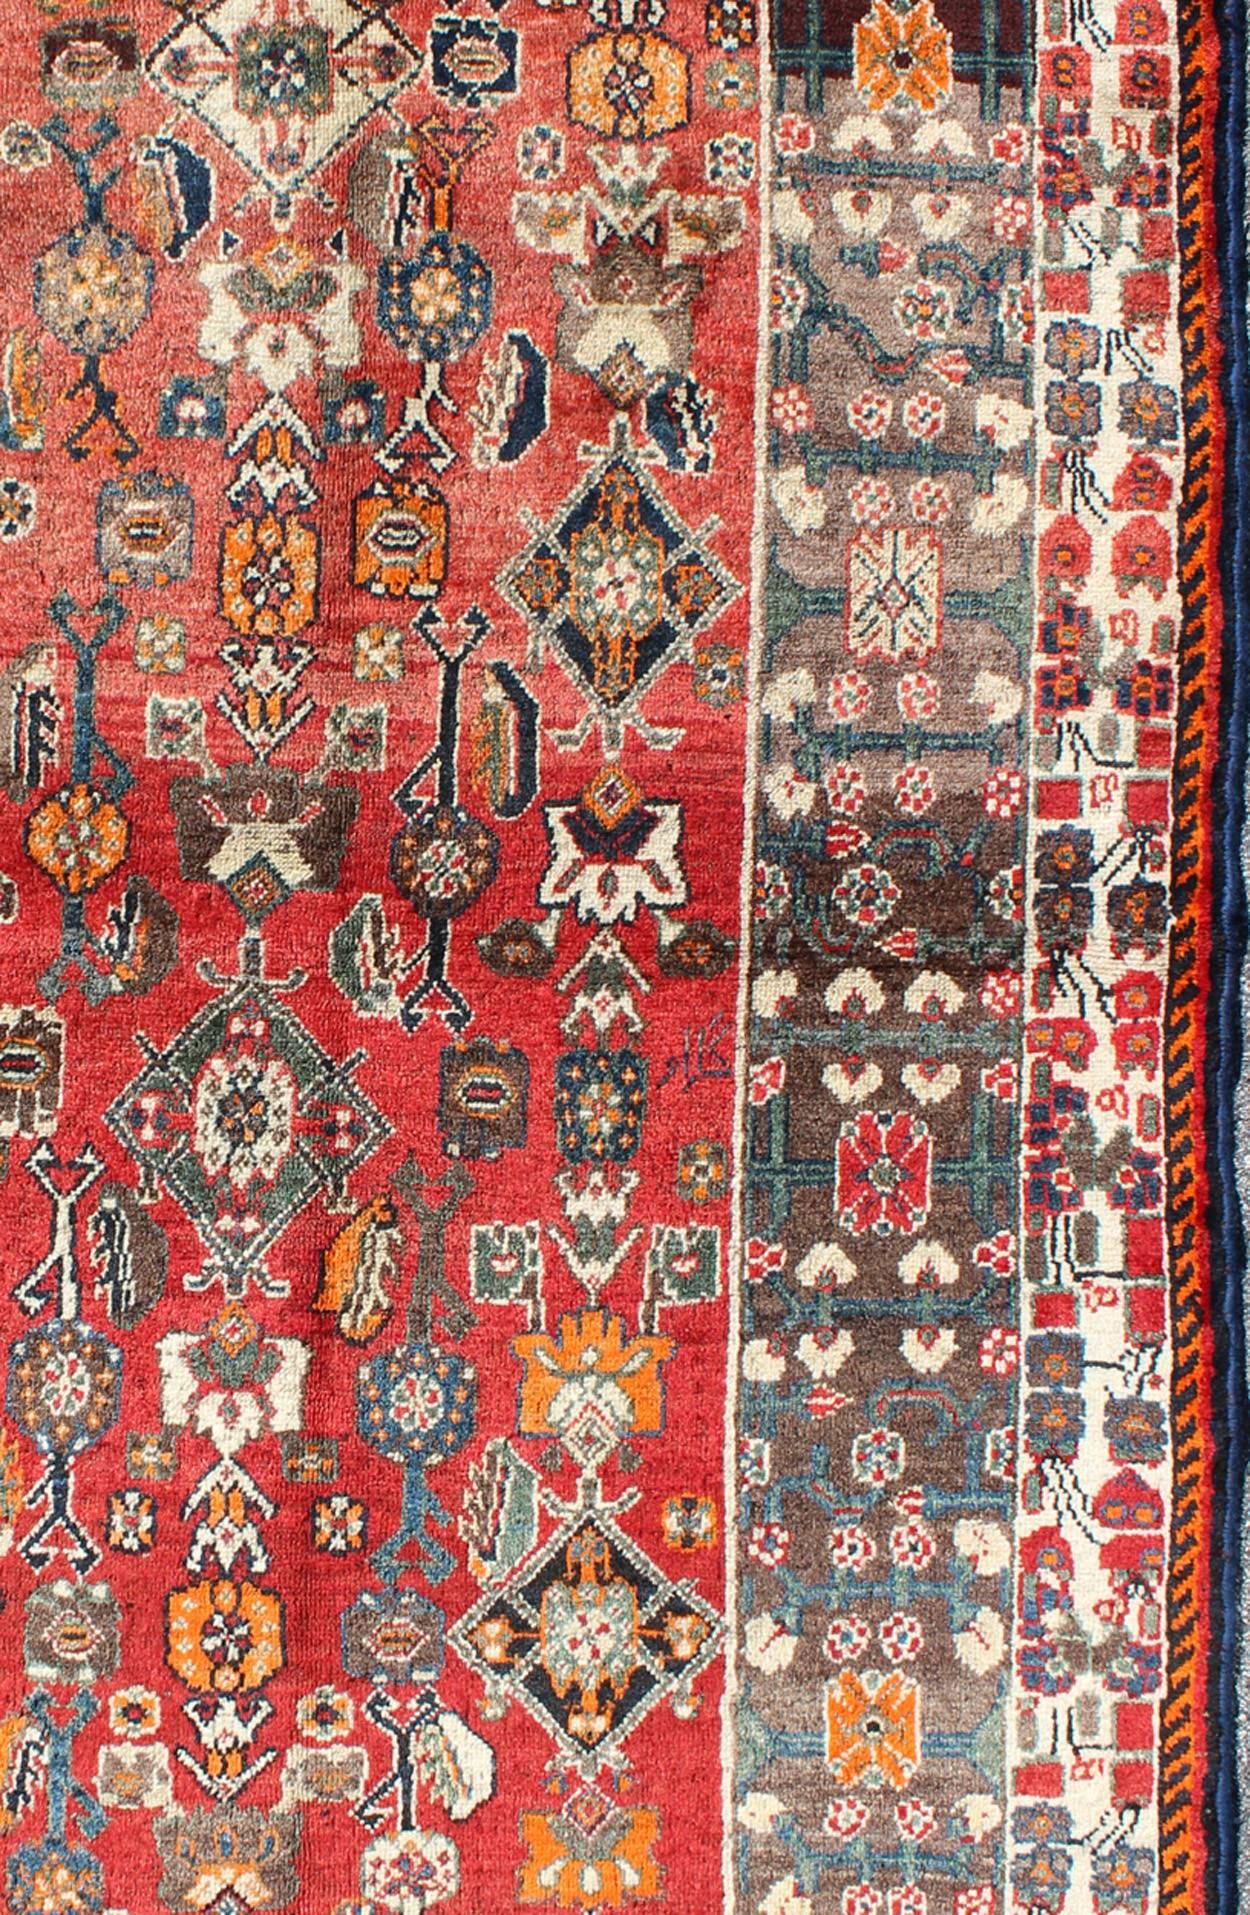 Hand-Knotted Red Background Shiraz Persian Rug with Sub-Geometric Motifs Throughout